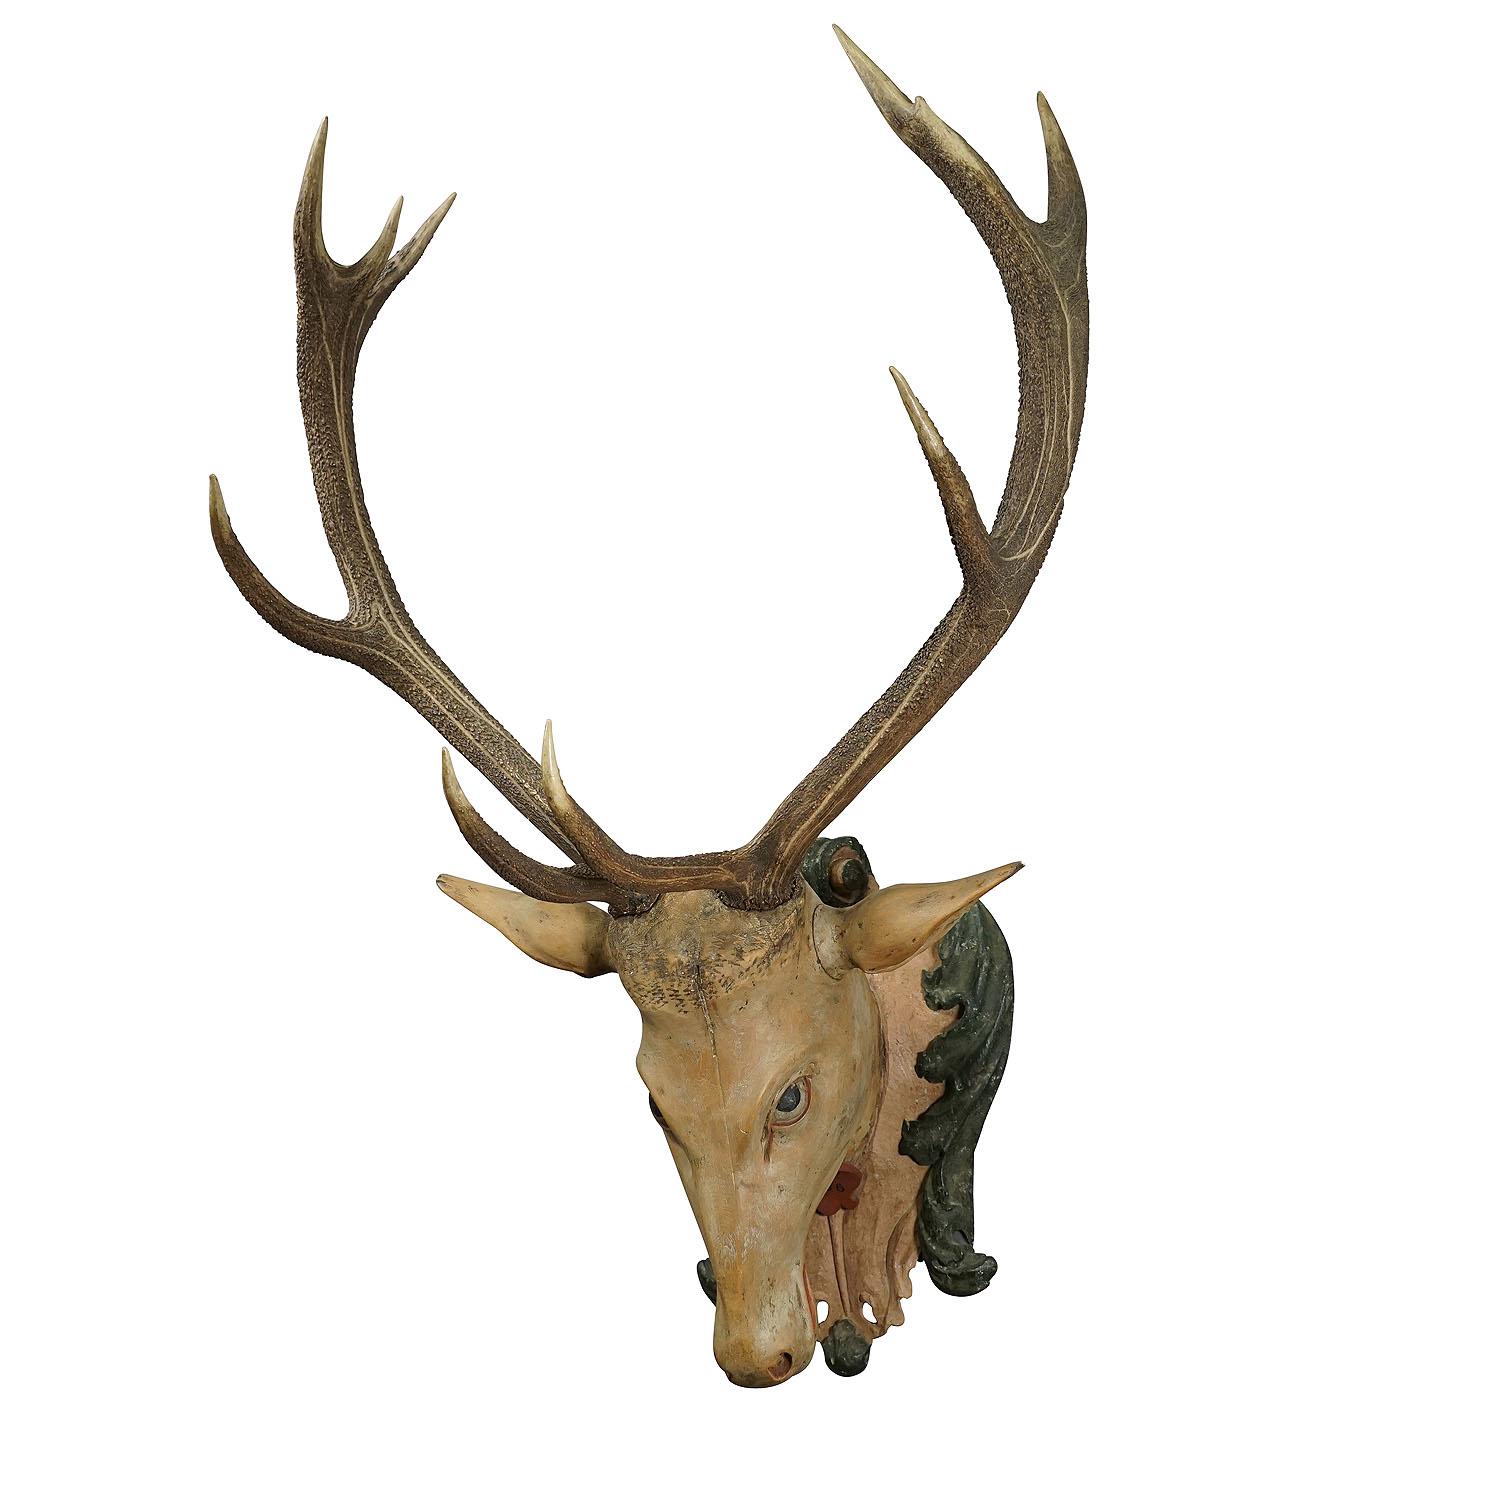 Large Antique Wooden Carved Black Forest Baroque stag head with 10 Point Trophy

A large antique Black Forest baroque stag head. Carved in typical abstract style of the early 18th century. It is mounted on a wooden carved and painted plaque with